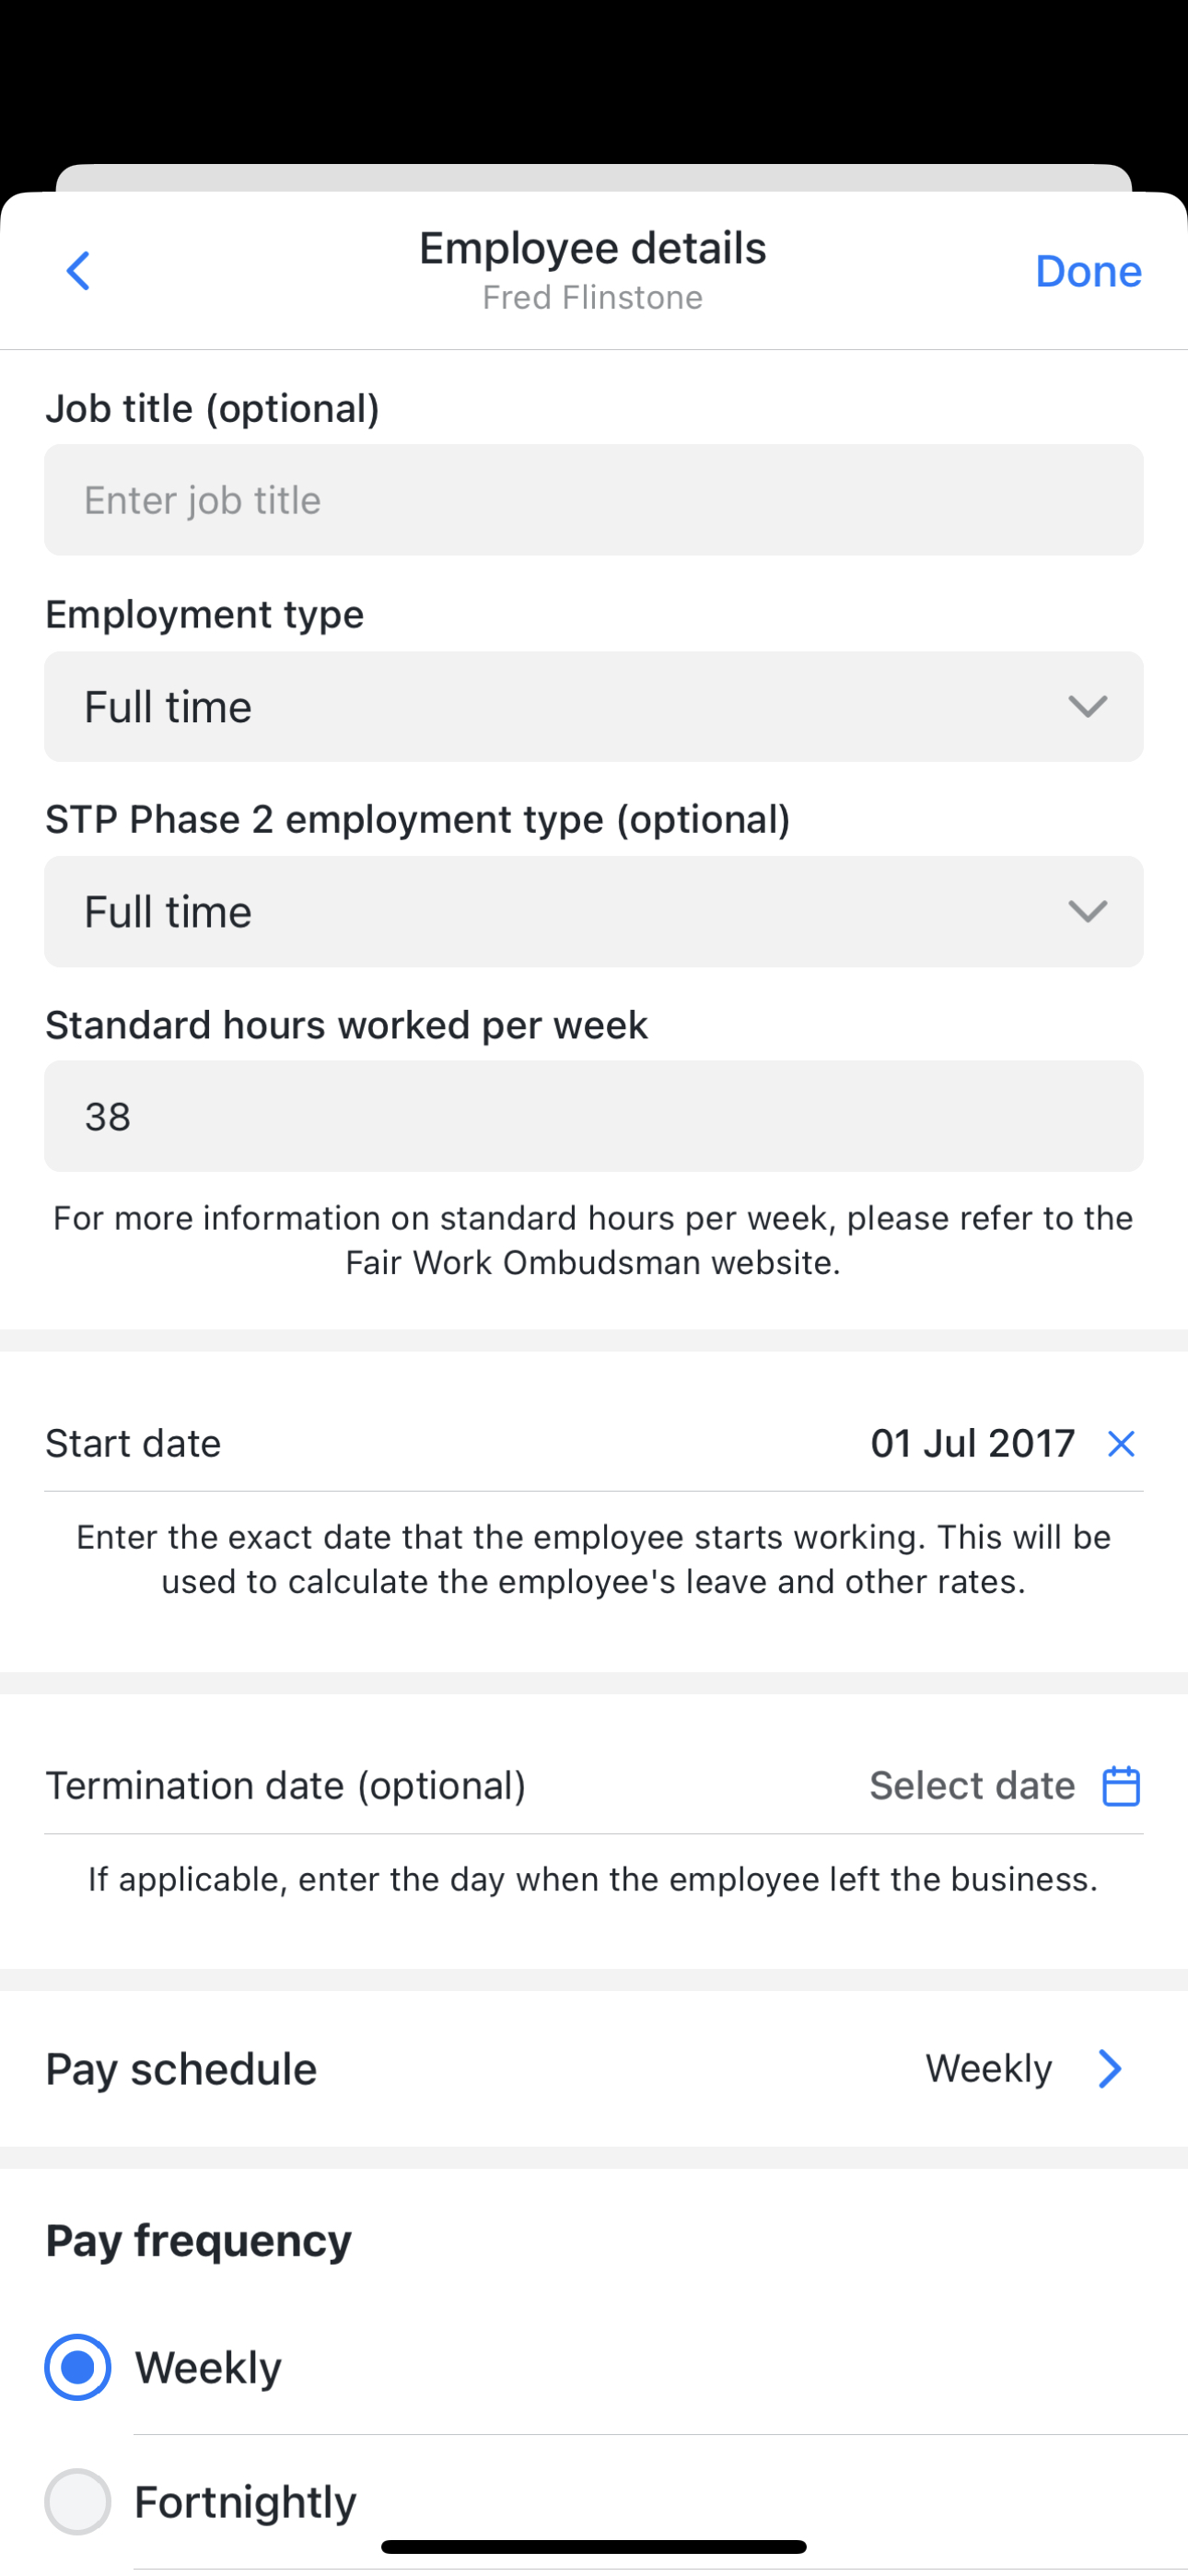 STP Phase 2 employment type (optional) selected